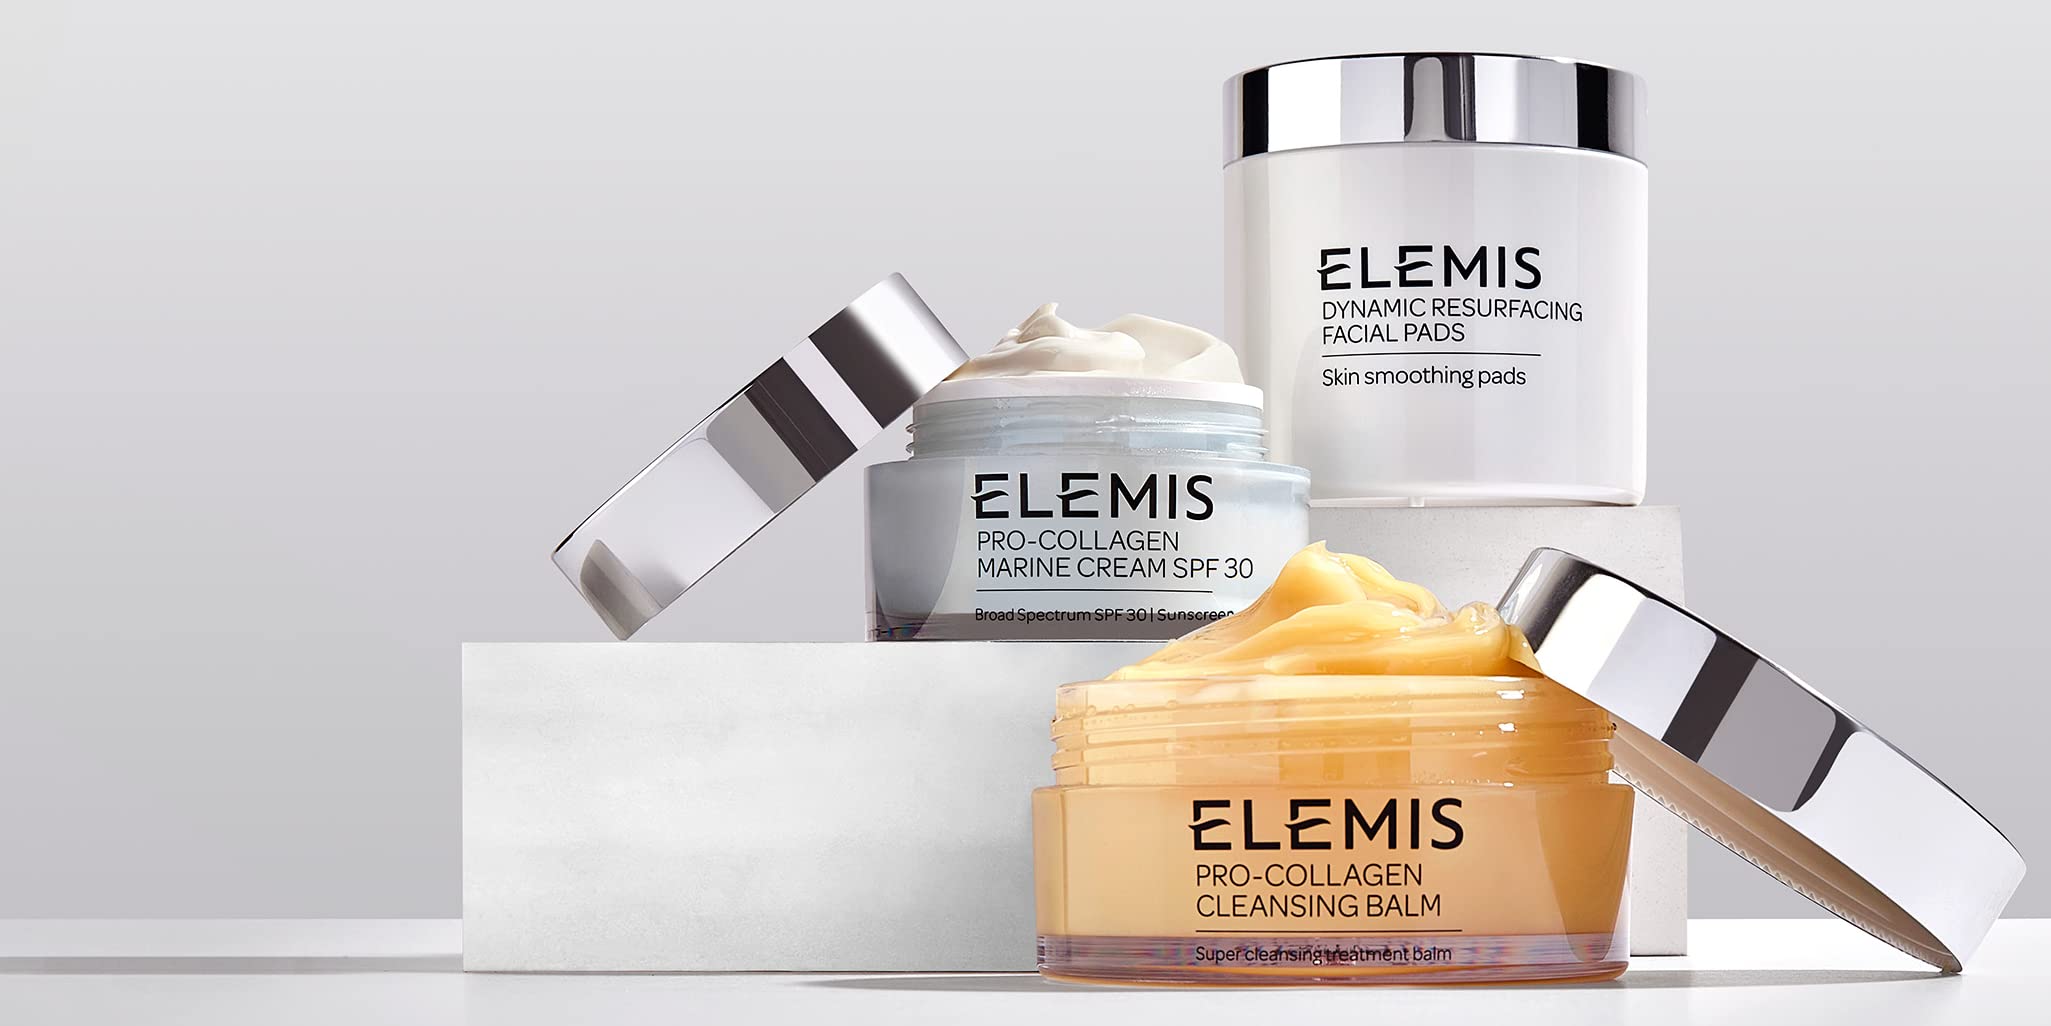 Elemis Skincare is the Aromatherapy-Based Brand Everyone's Talking About